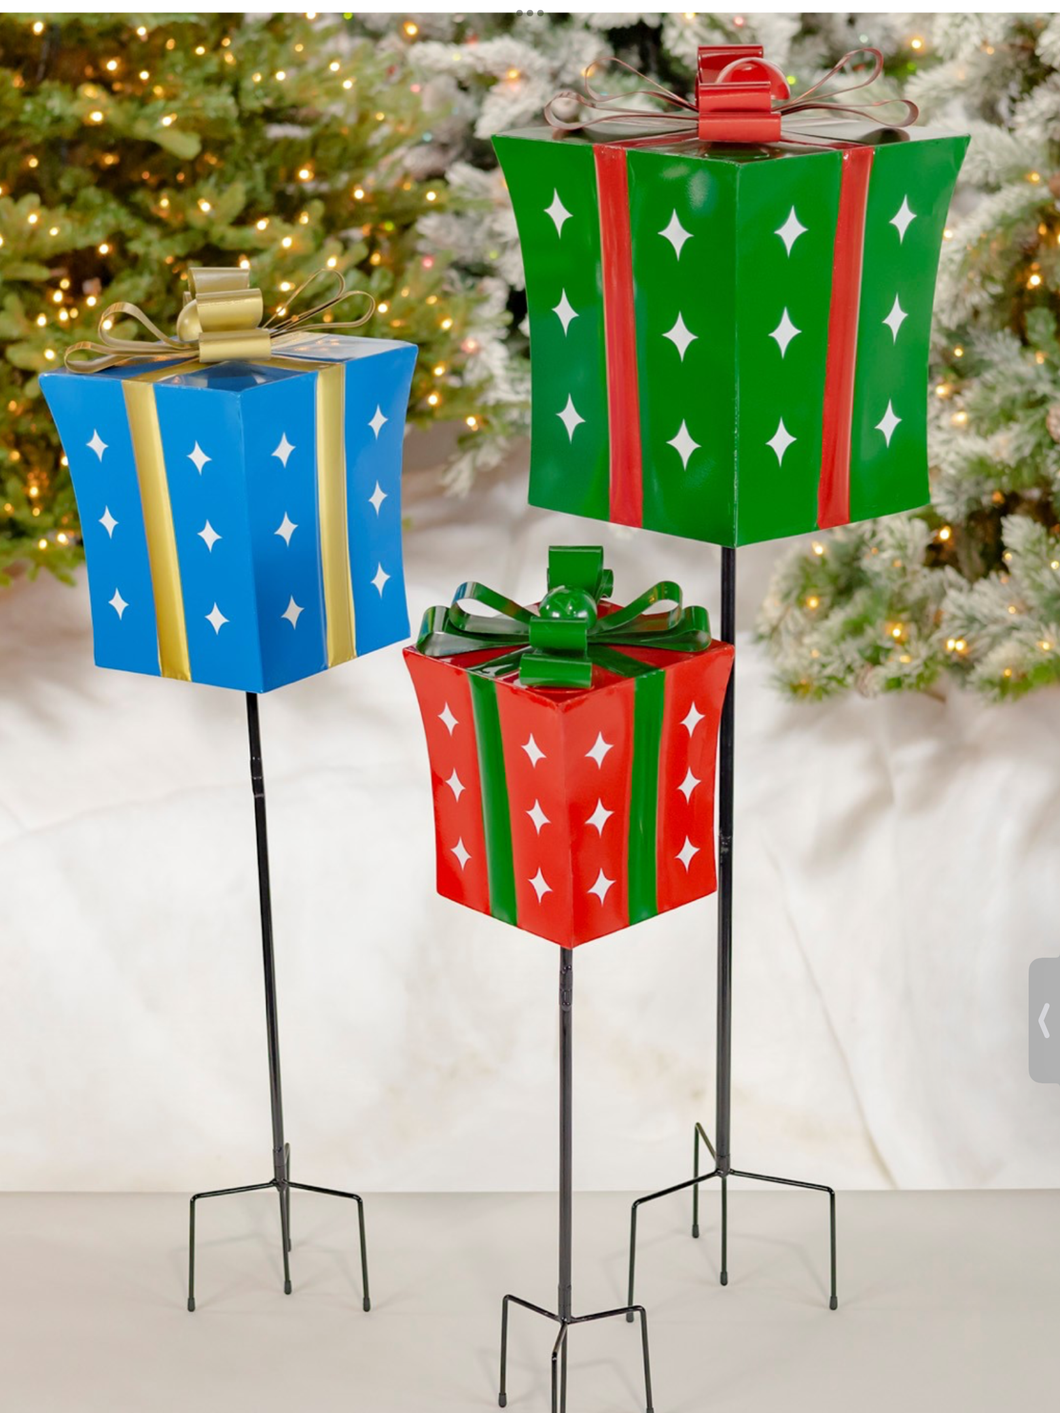 SET OF 3 ASSORTED CHRISTMAS GIFT BOXES WITH TWINKLE STARS GARDEN STAKES